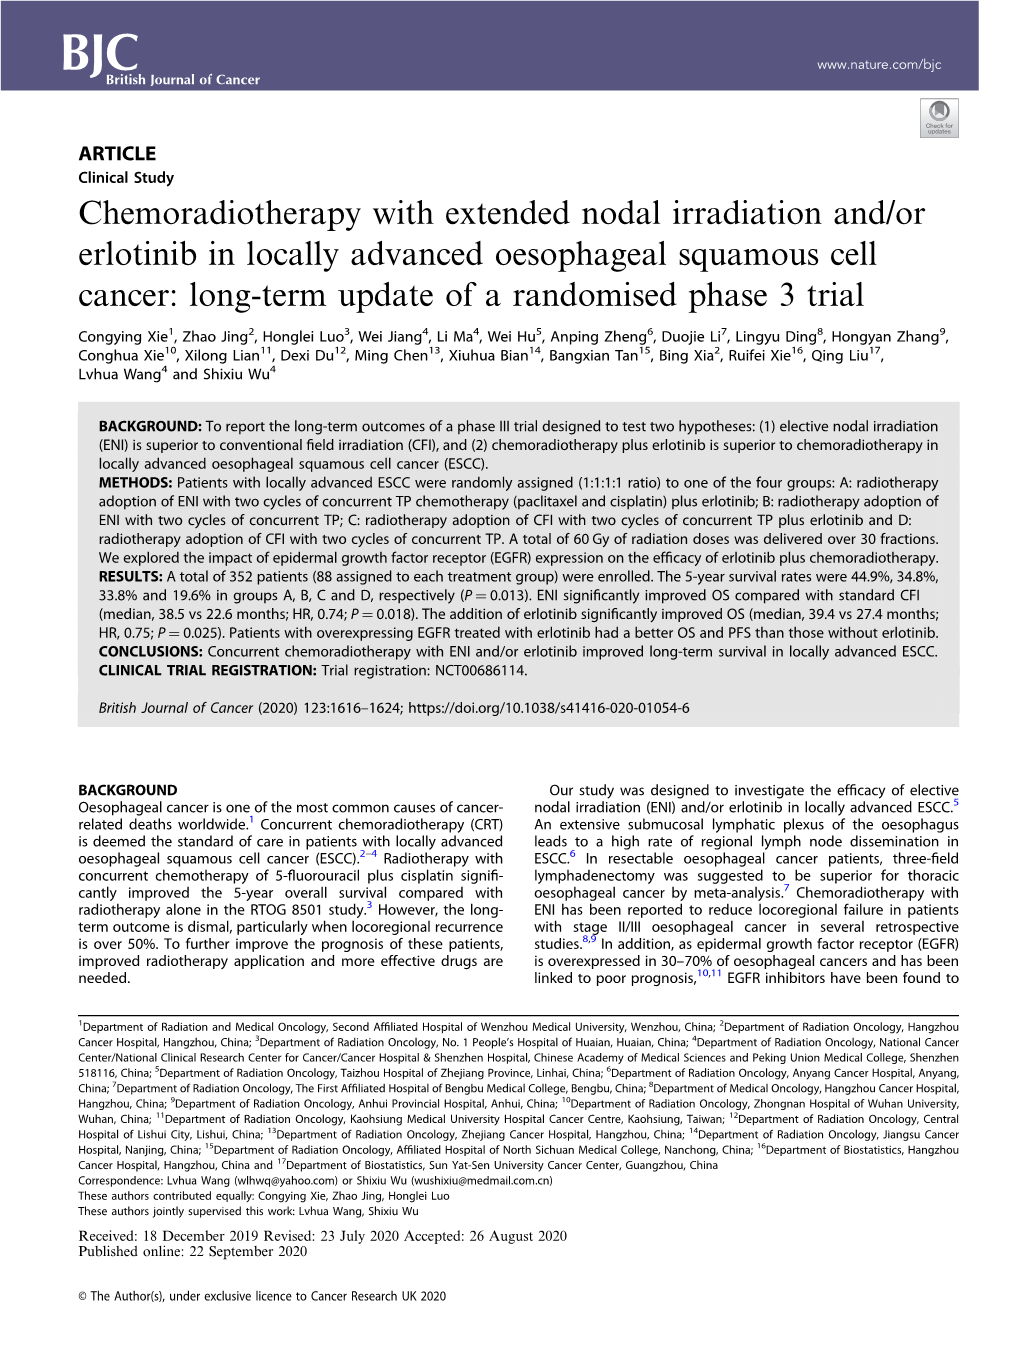 Chemoradiotherapy with Extended Nodal Irradiation And/Or